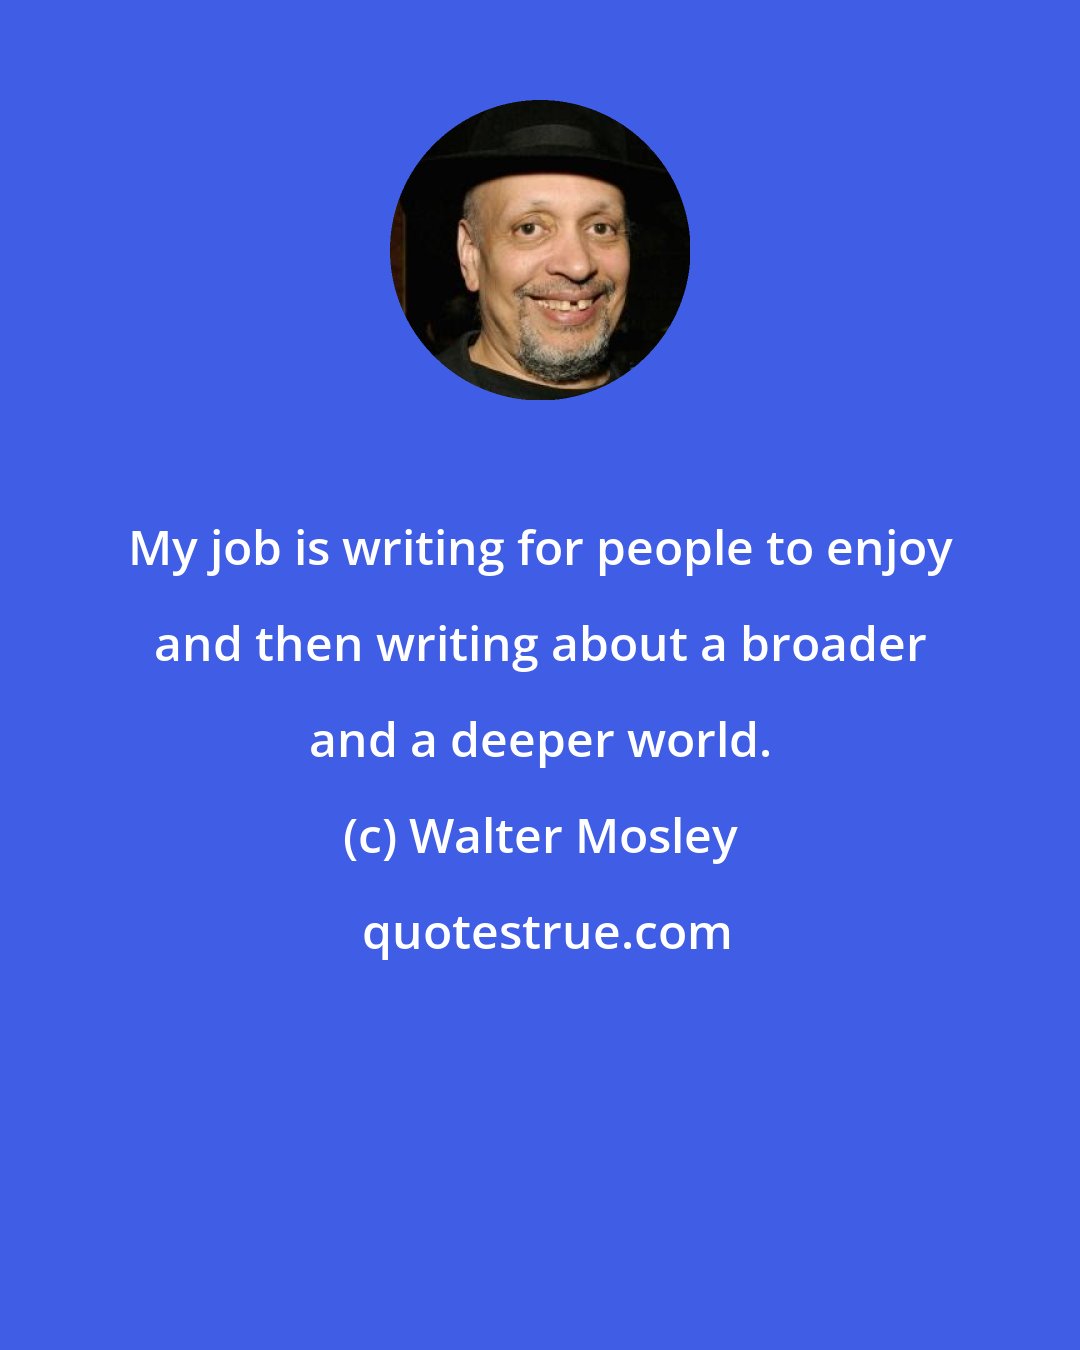 Walter Mosley: My job is writing for people to enjoy and then writing about a broader and a deeper world.